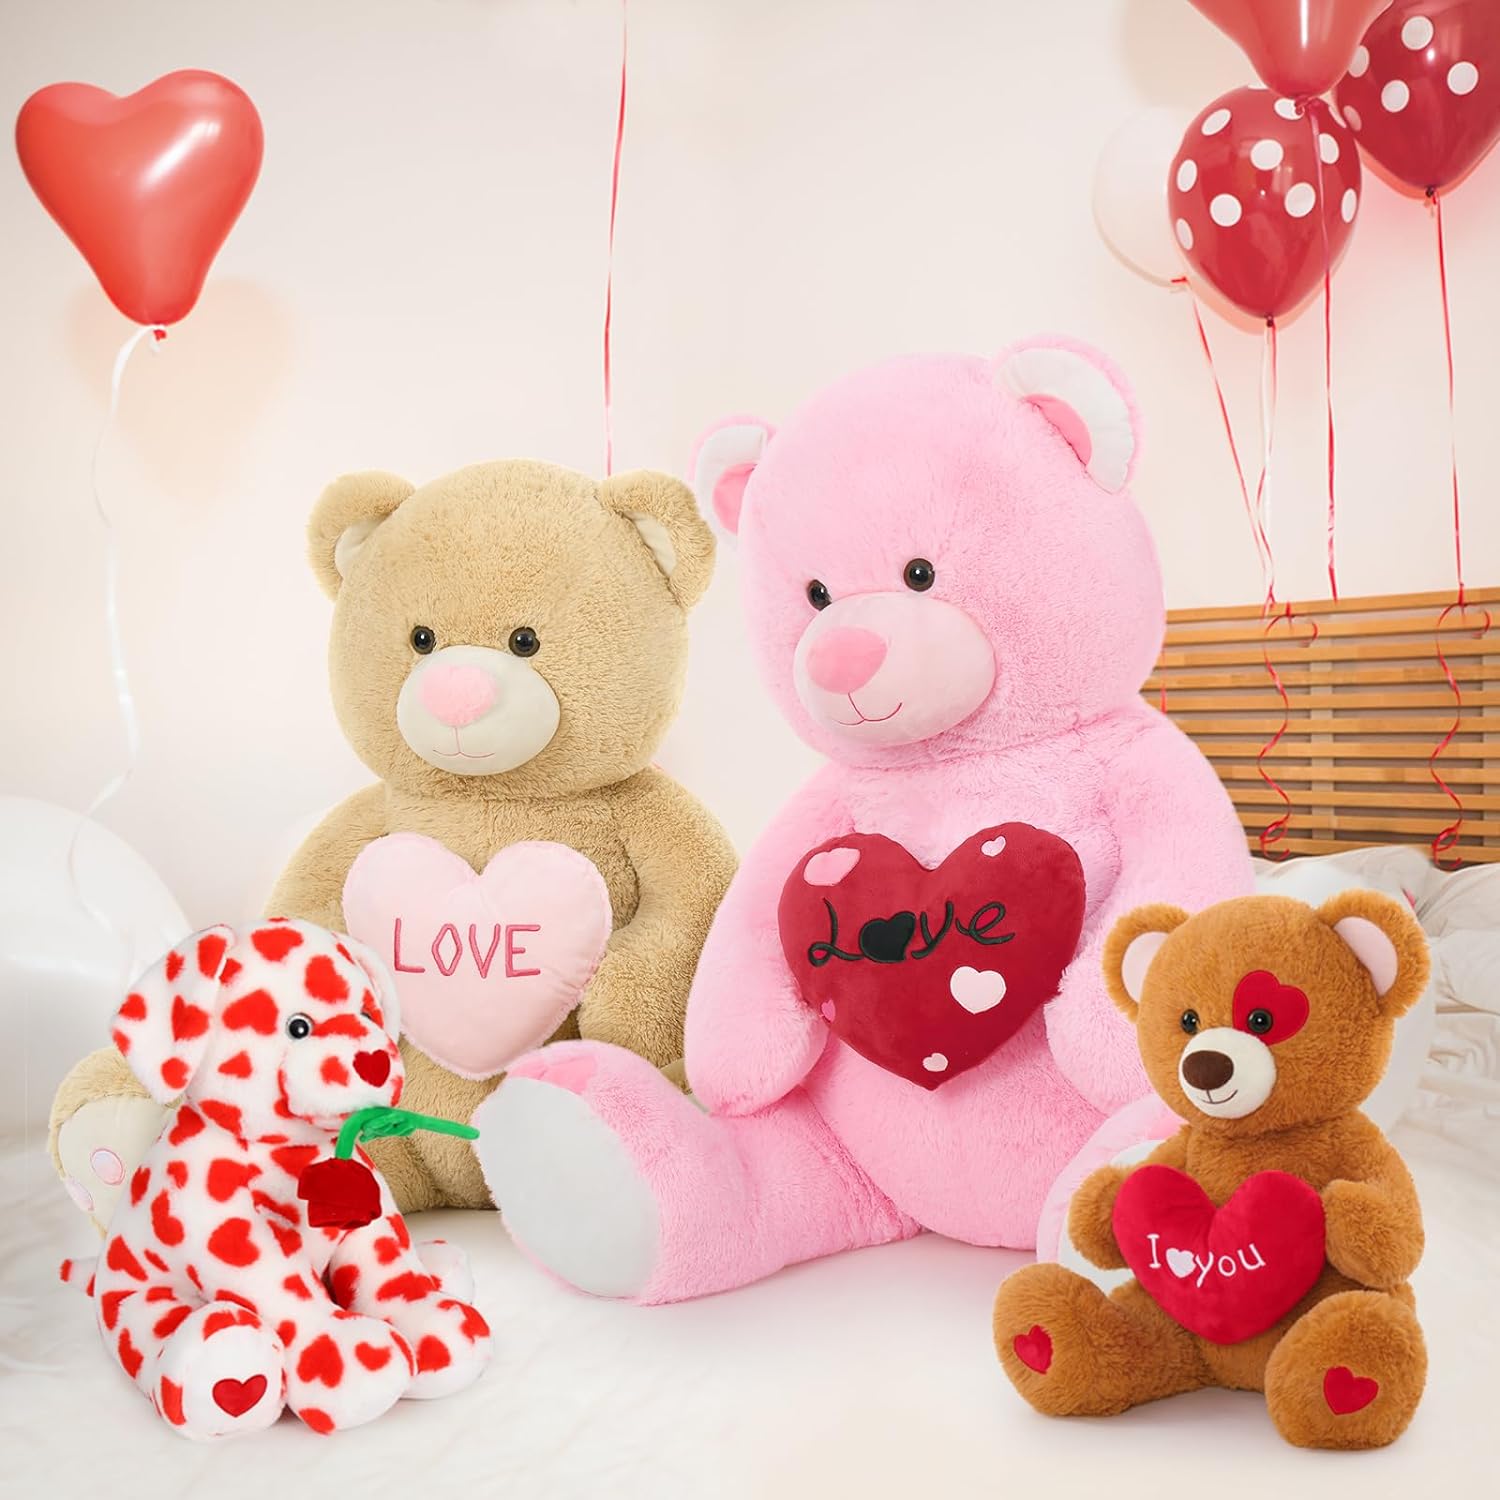 Valentine's Teddy Bear Plush Toy, Pink, 51 Inches